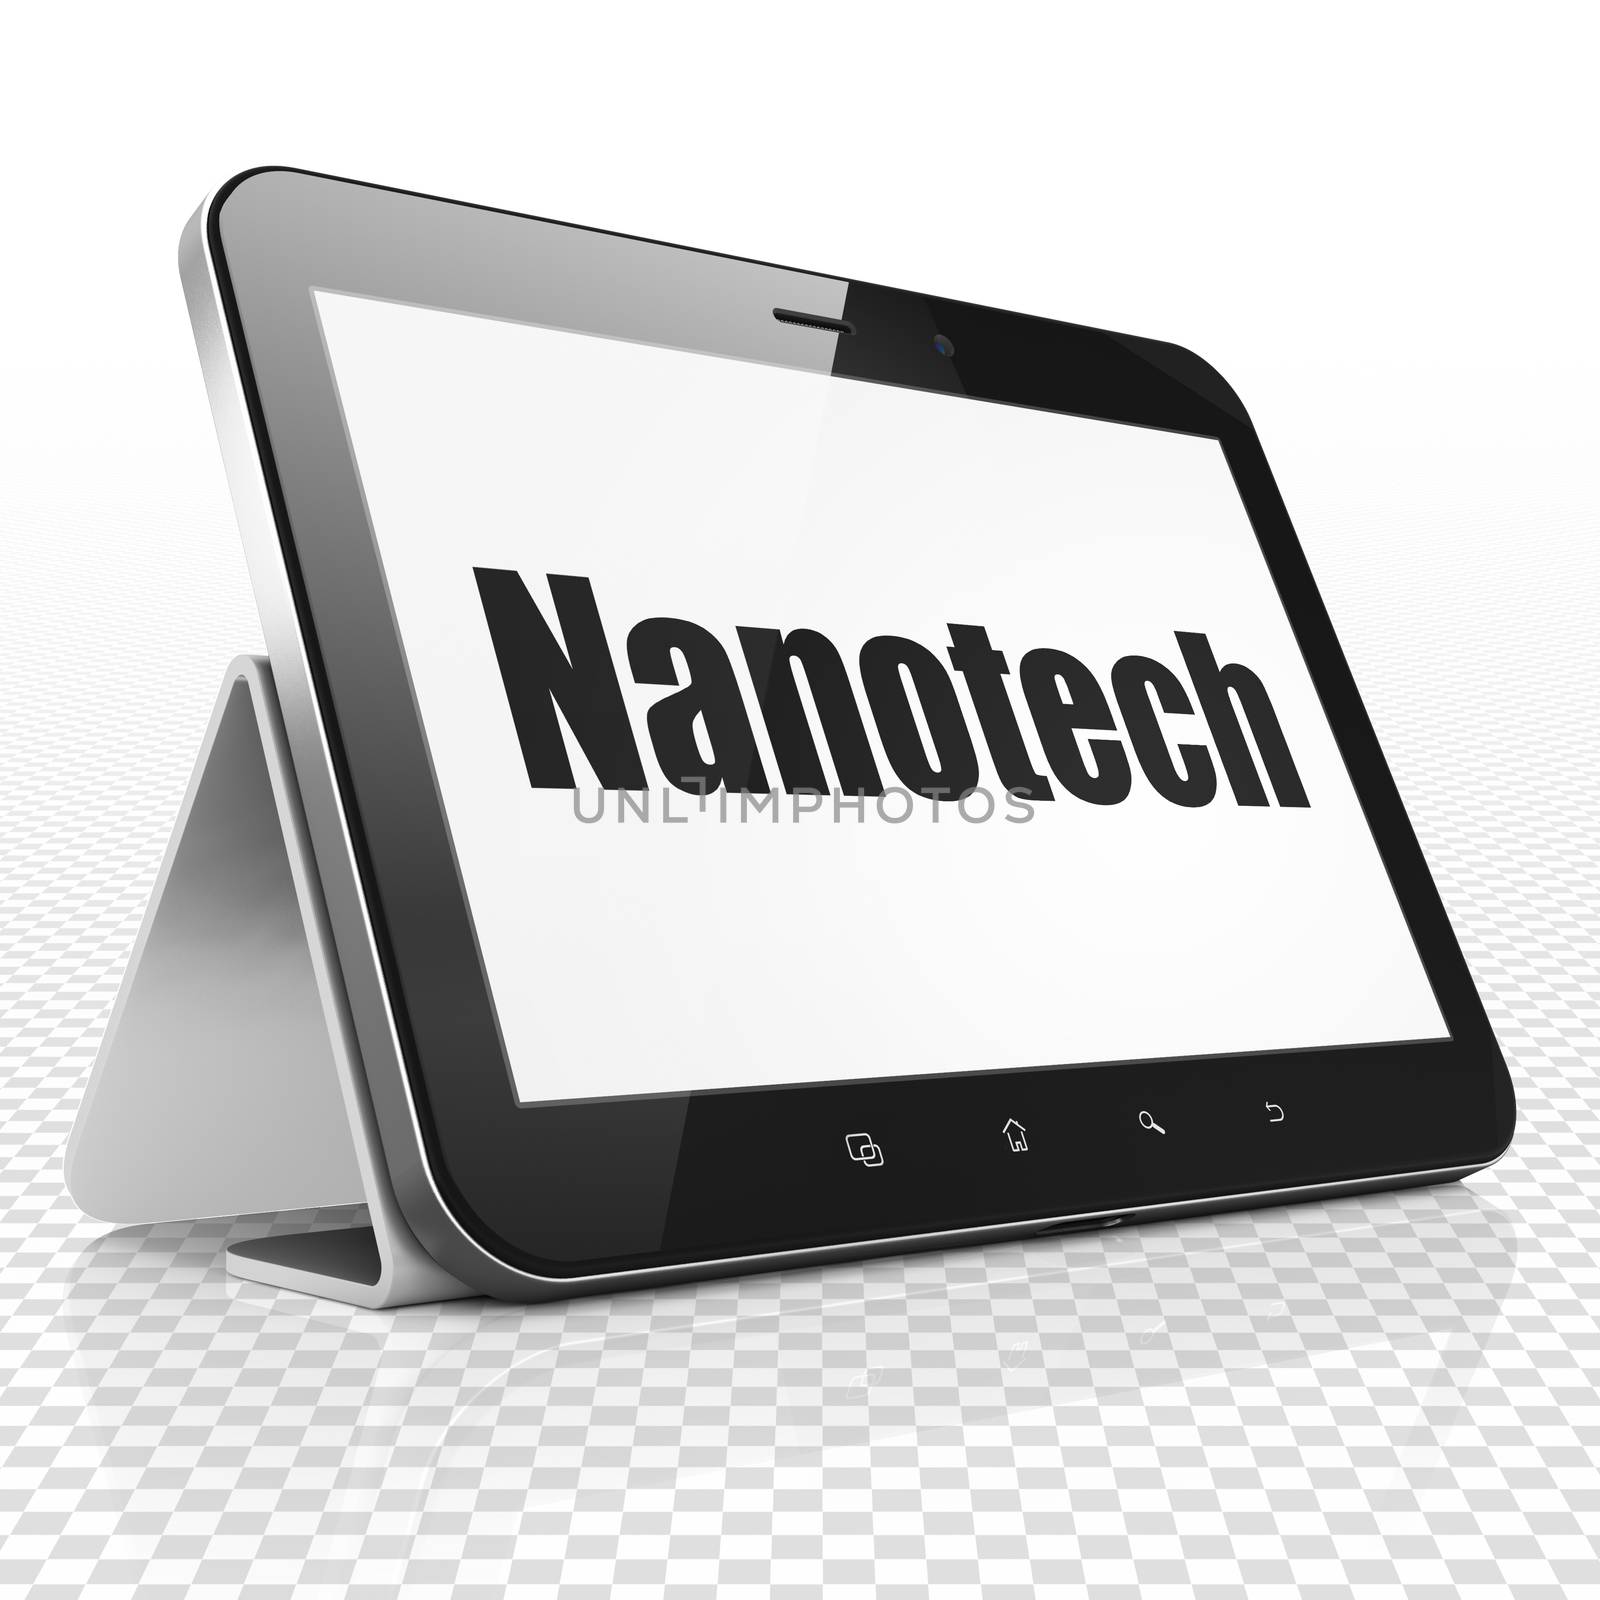 Science concept: Tablet Computer with black text Nanotech on display, 3D rendering